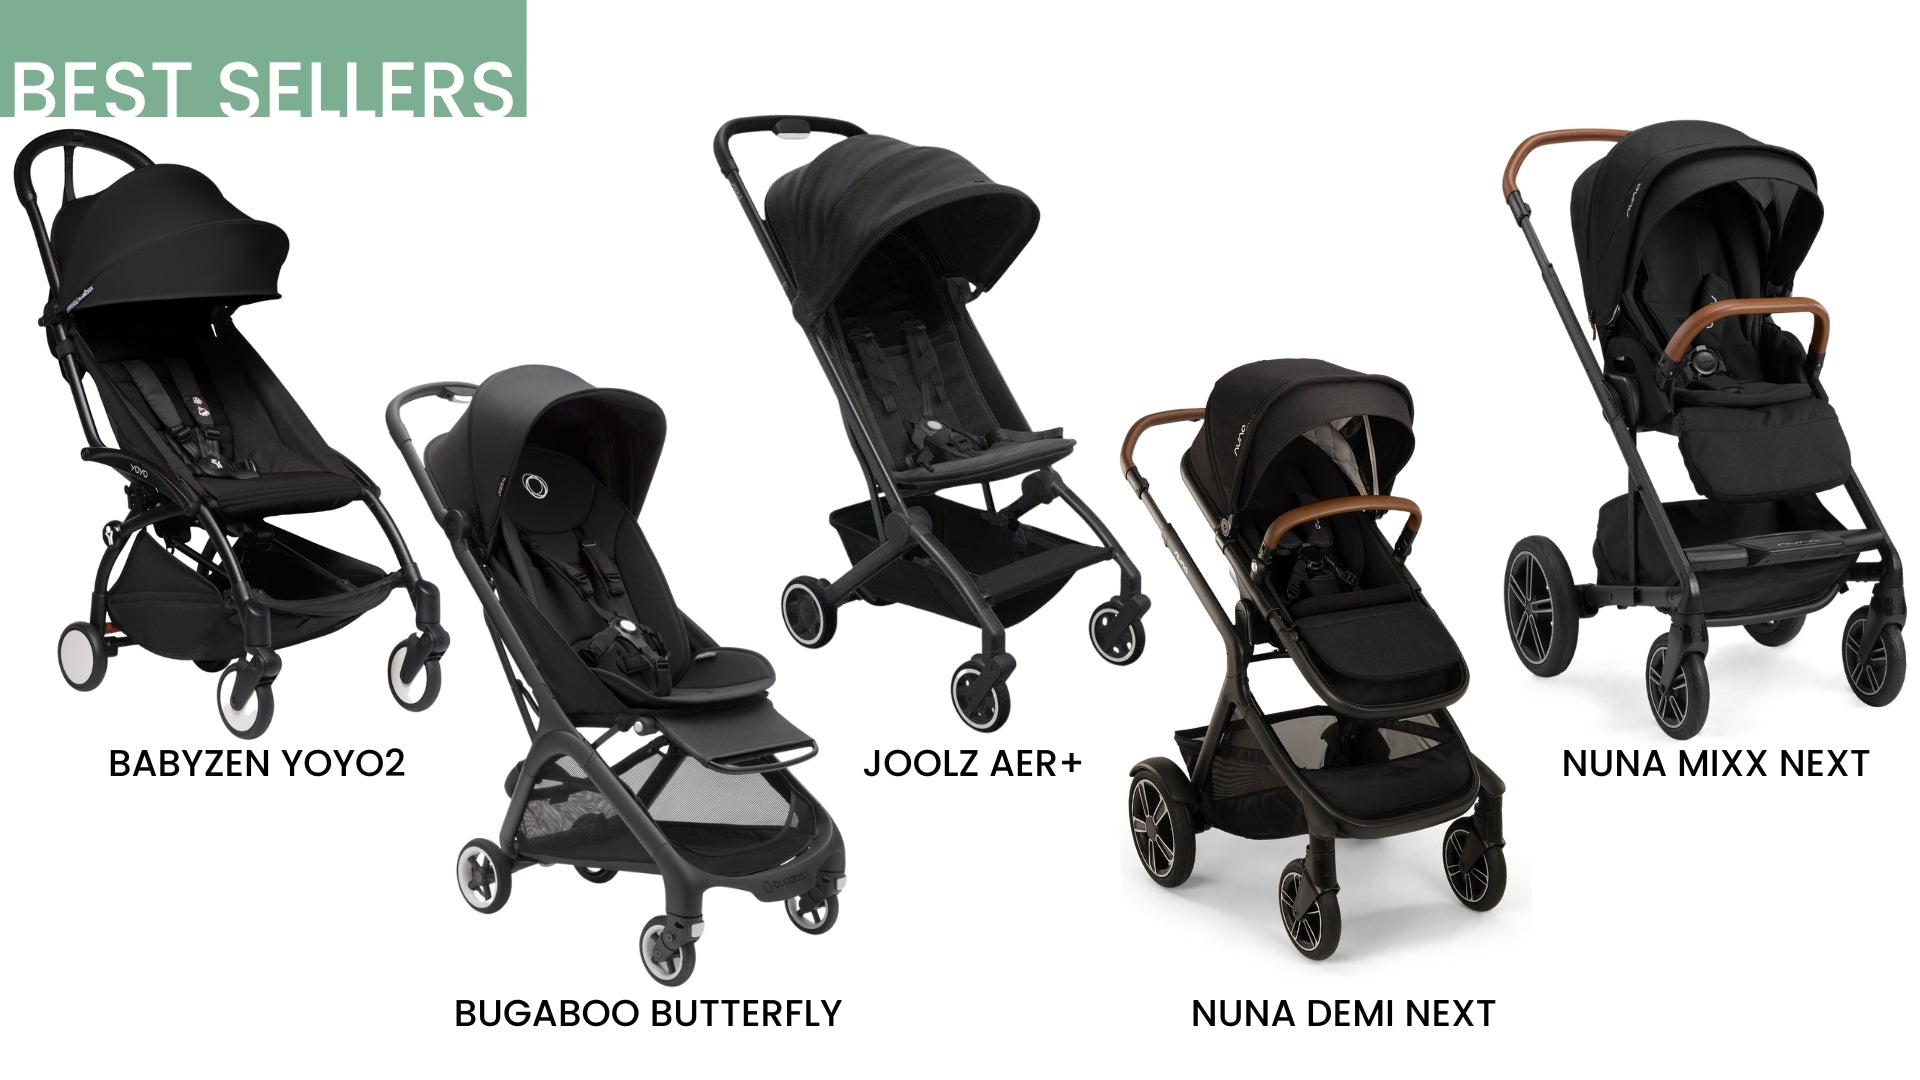 Images of best selling strollers